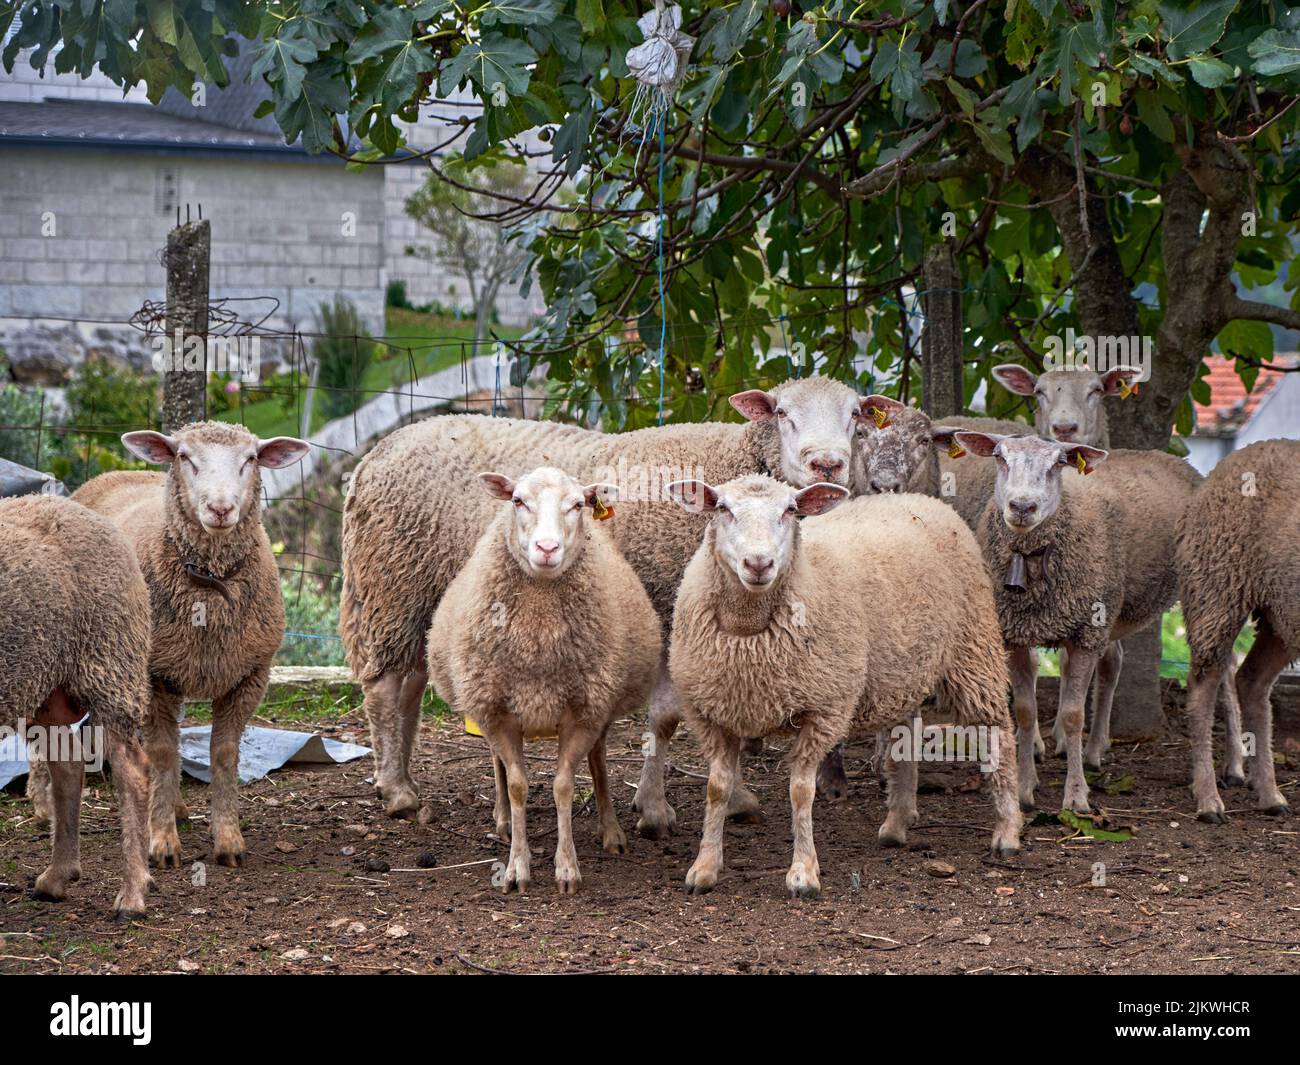 A herd of sheep in a farm Stock Photo